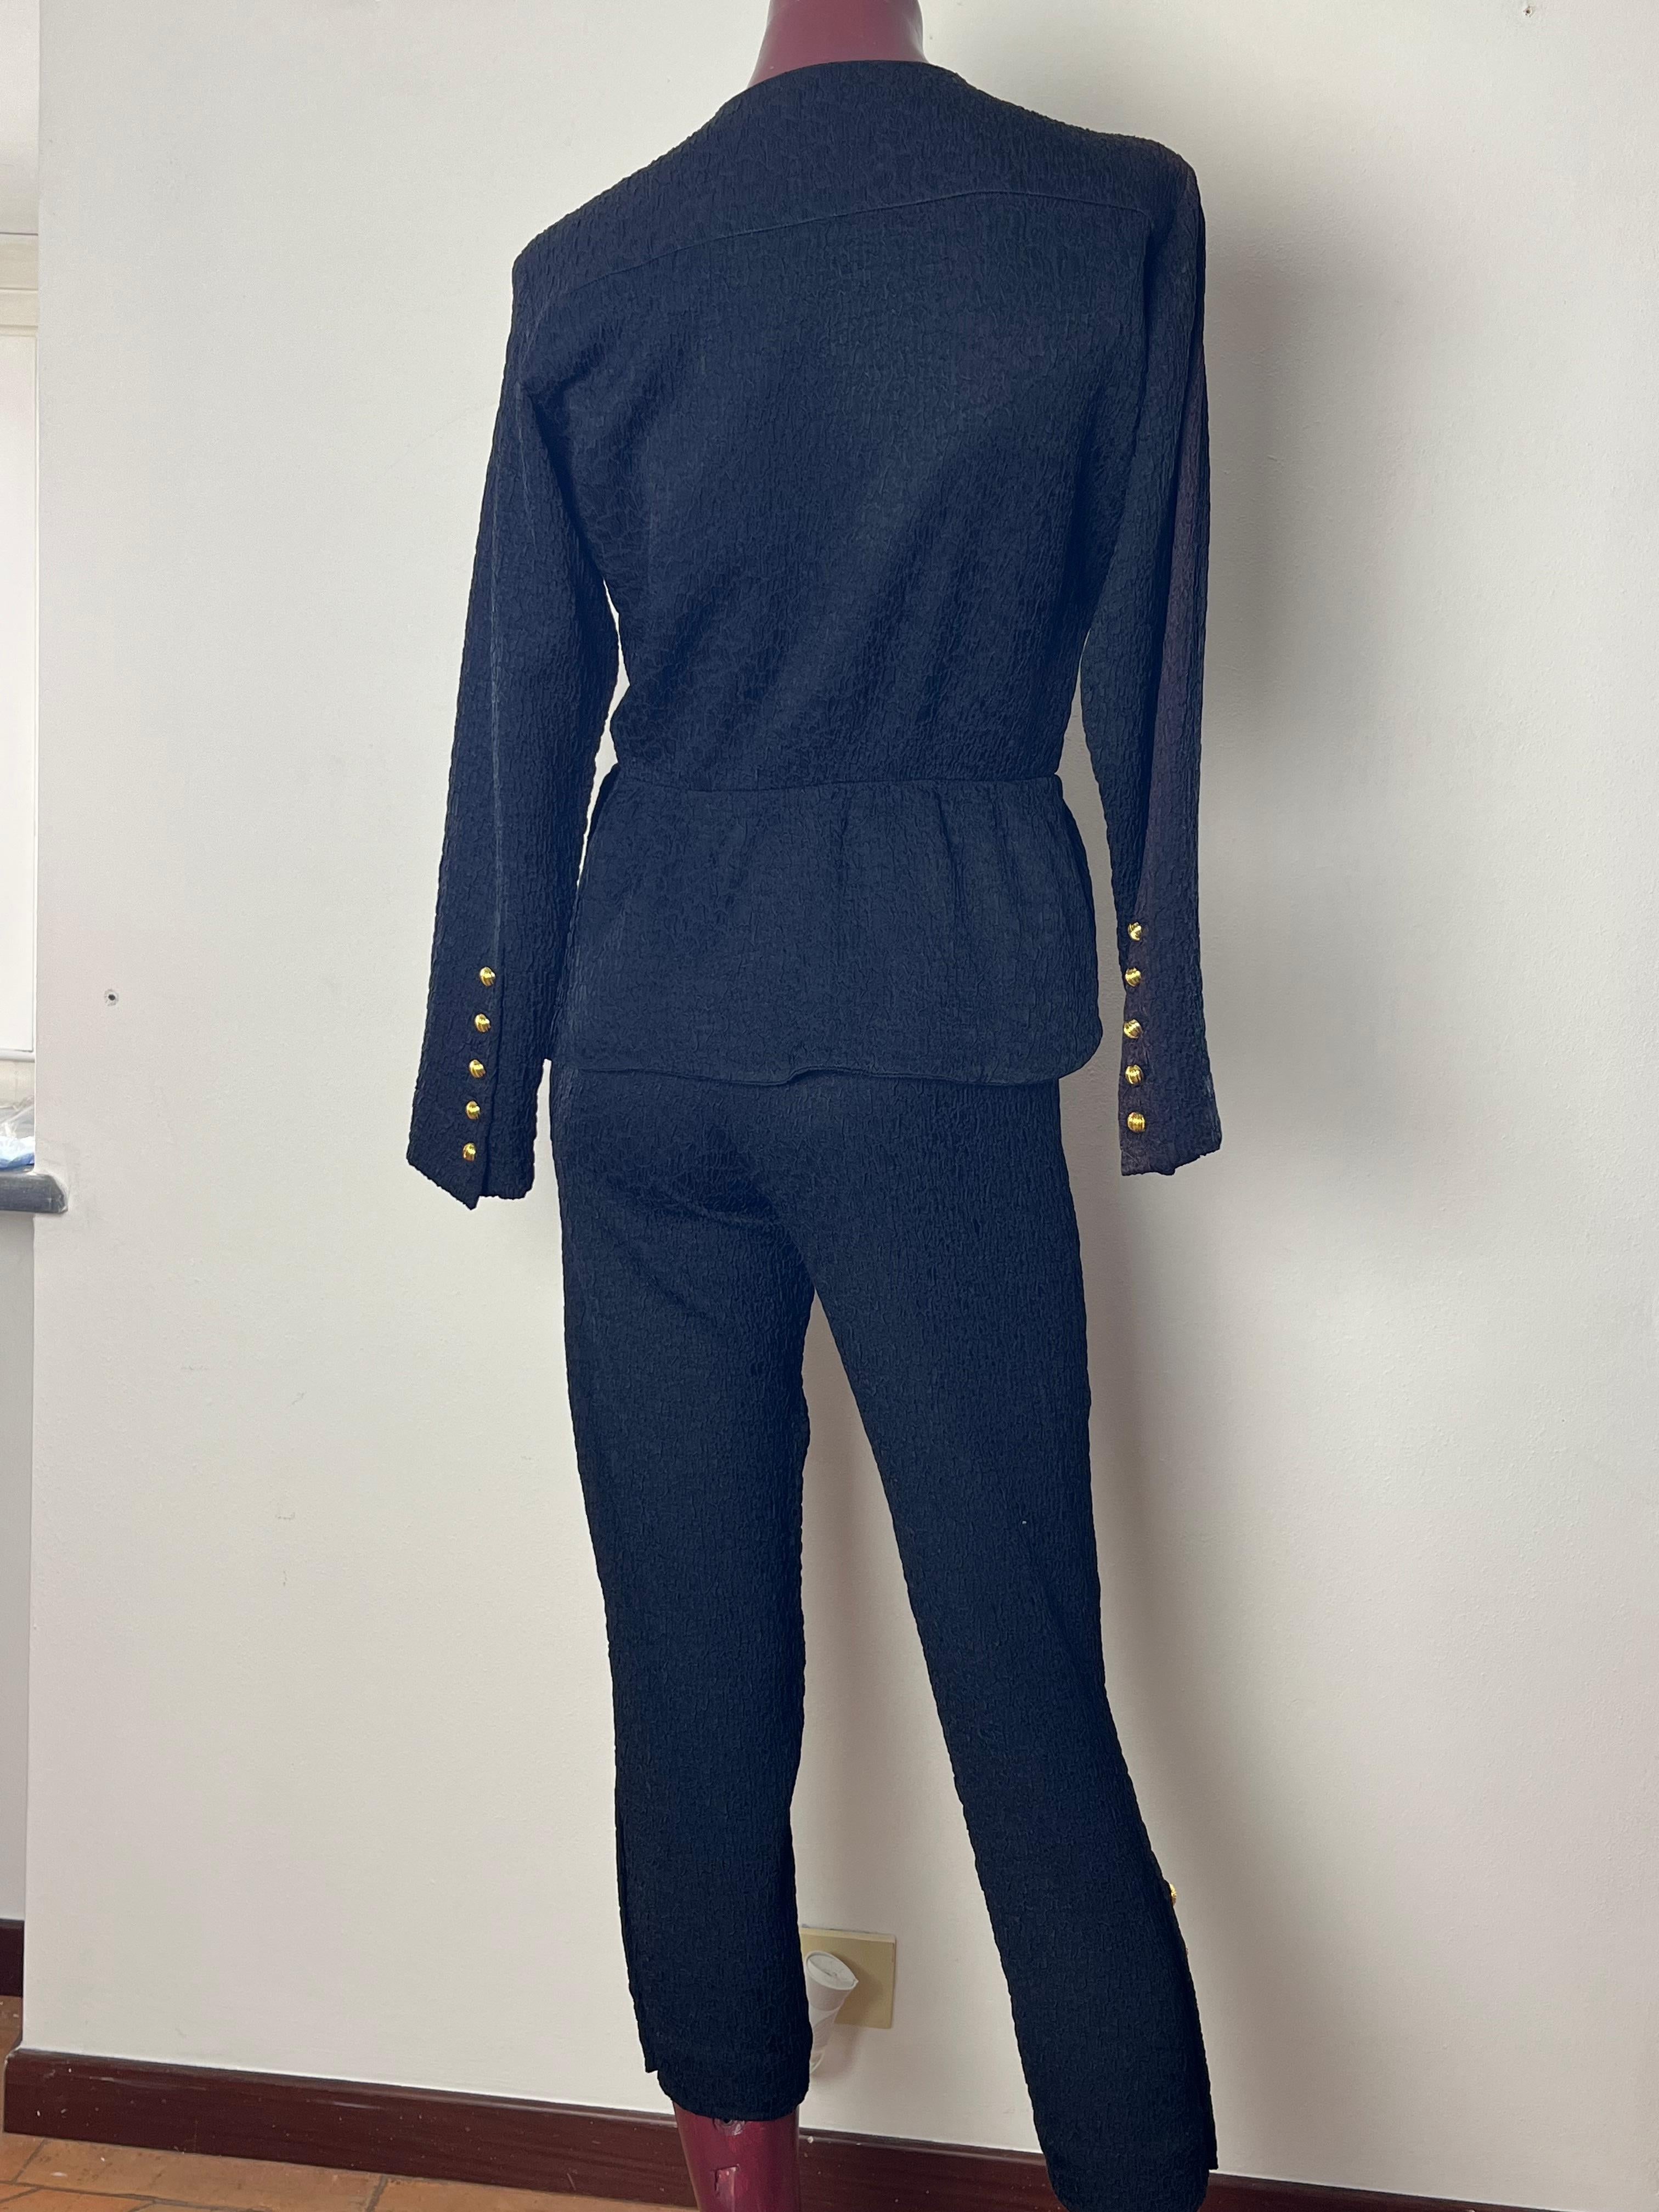 Women's black pants ysl suit with gold buttons For Sale